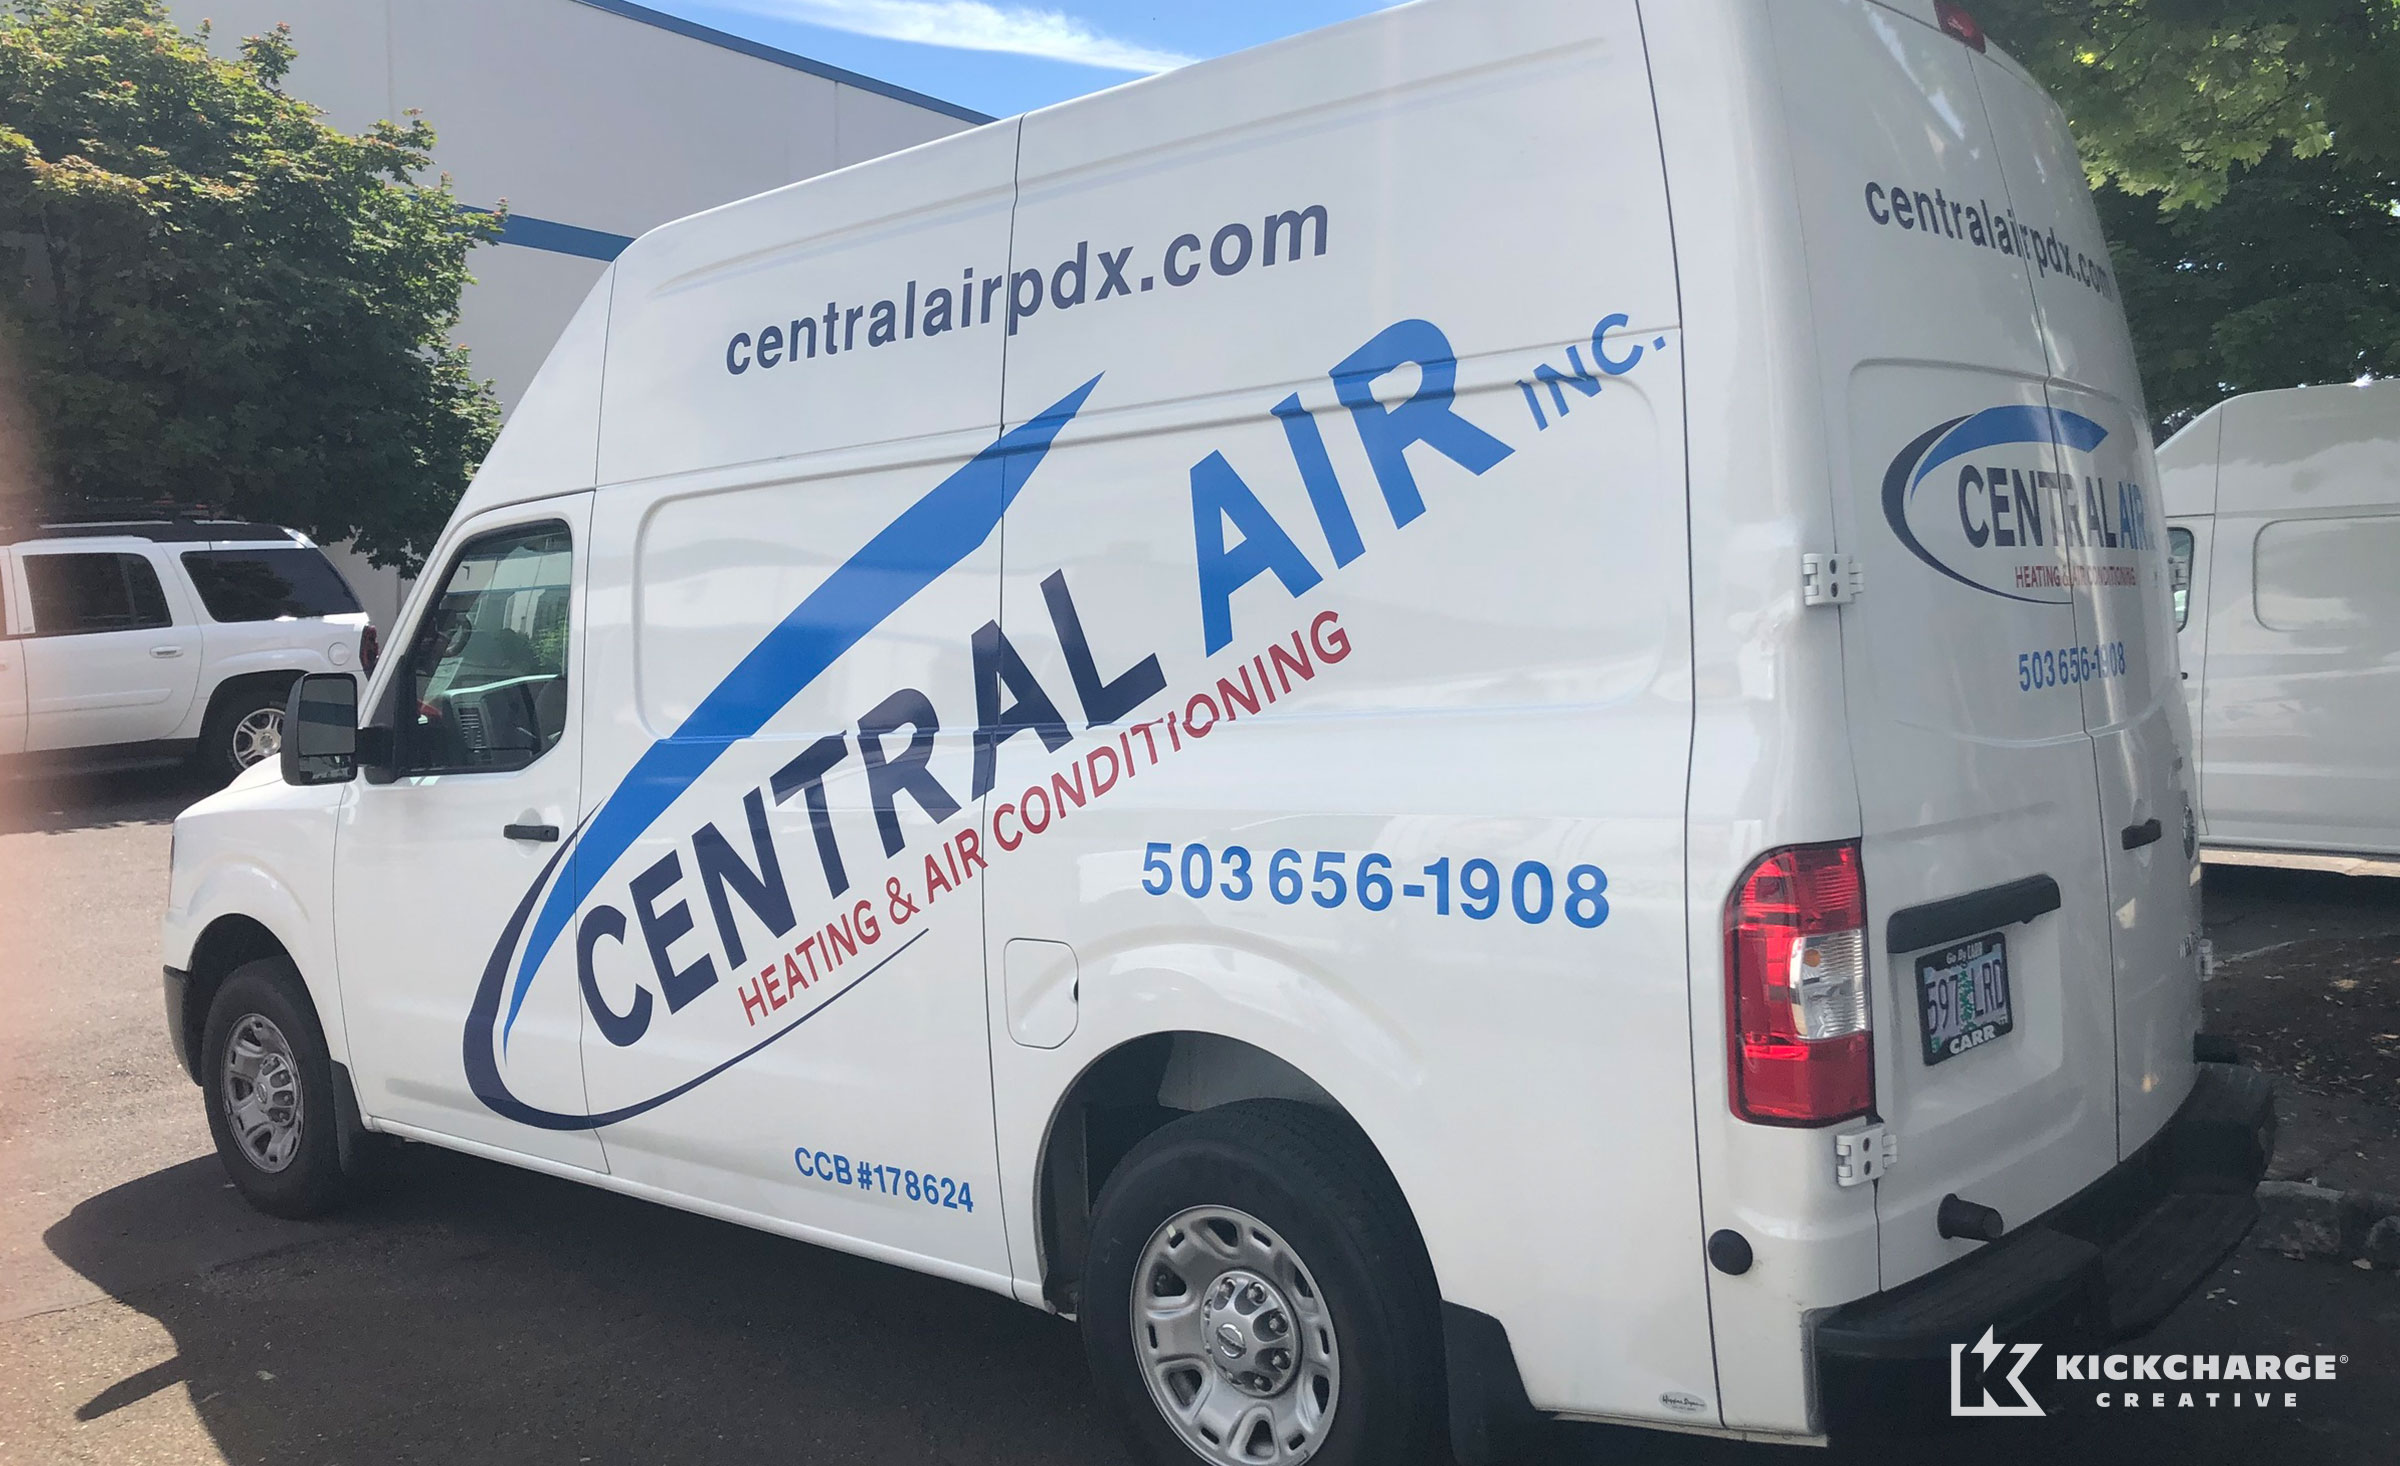 Central Air Heating & Cooling